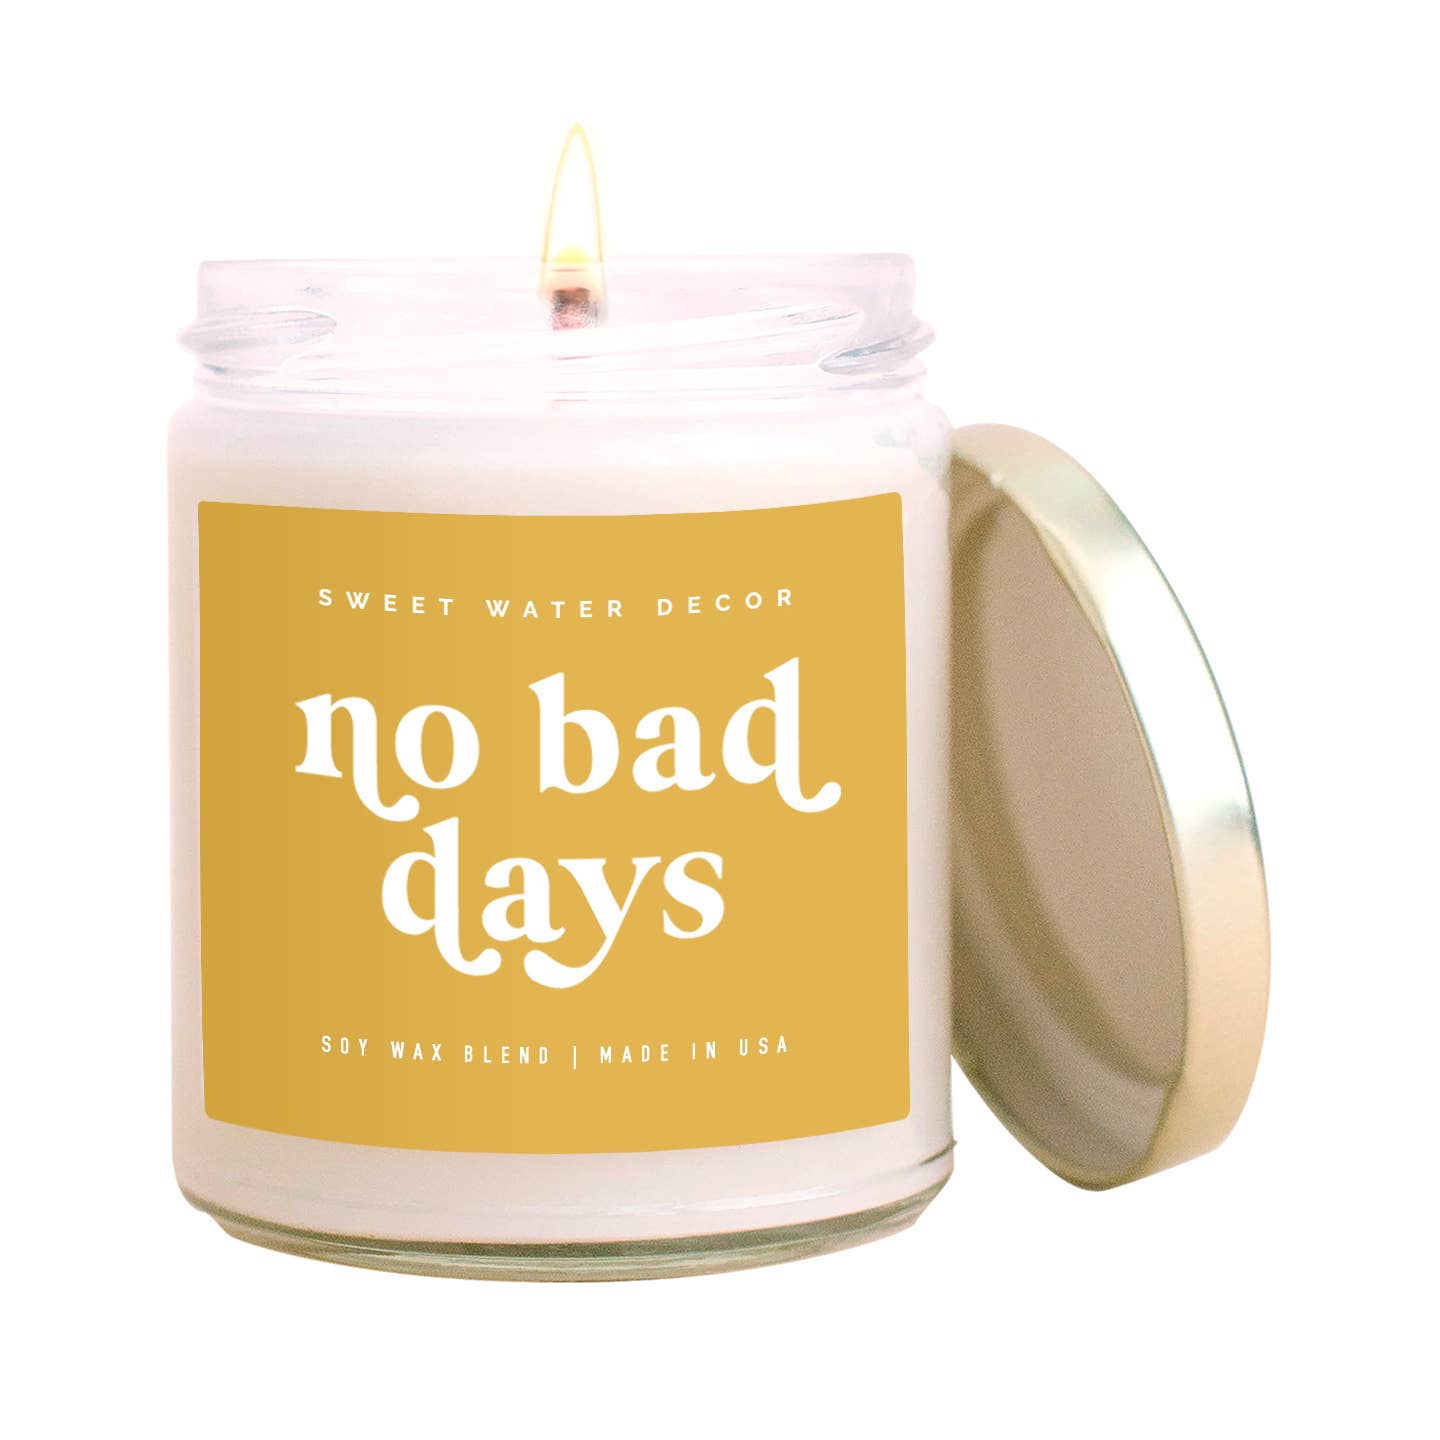 Sweet Water Decor - No Bad Days Soy Candle - Clear Jar - Mustard Yellow - 9 oz